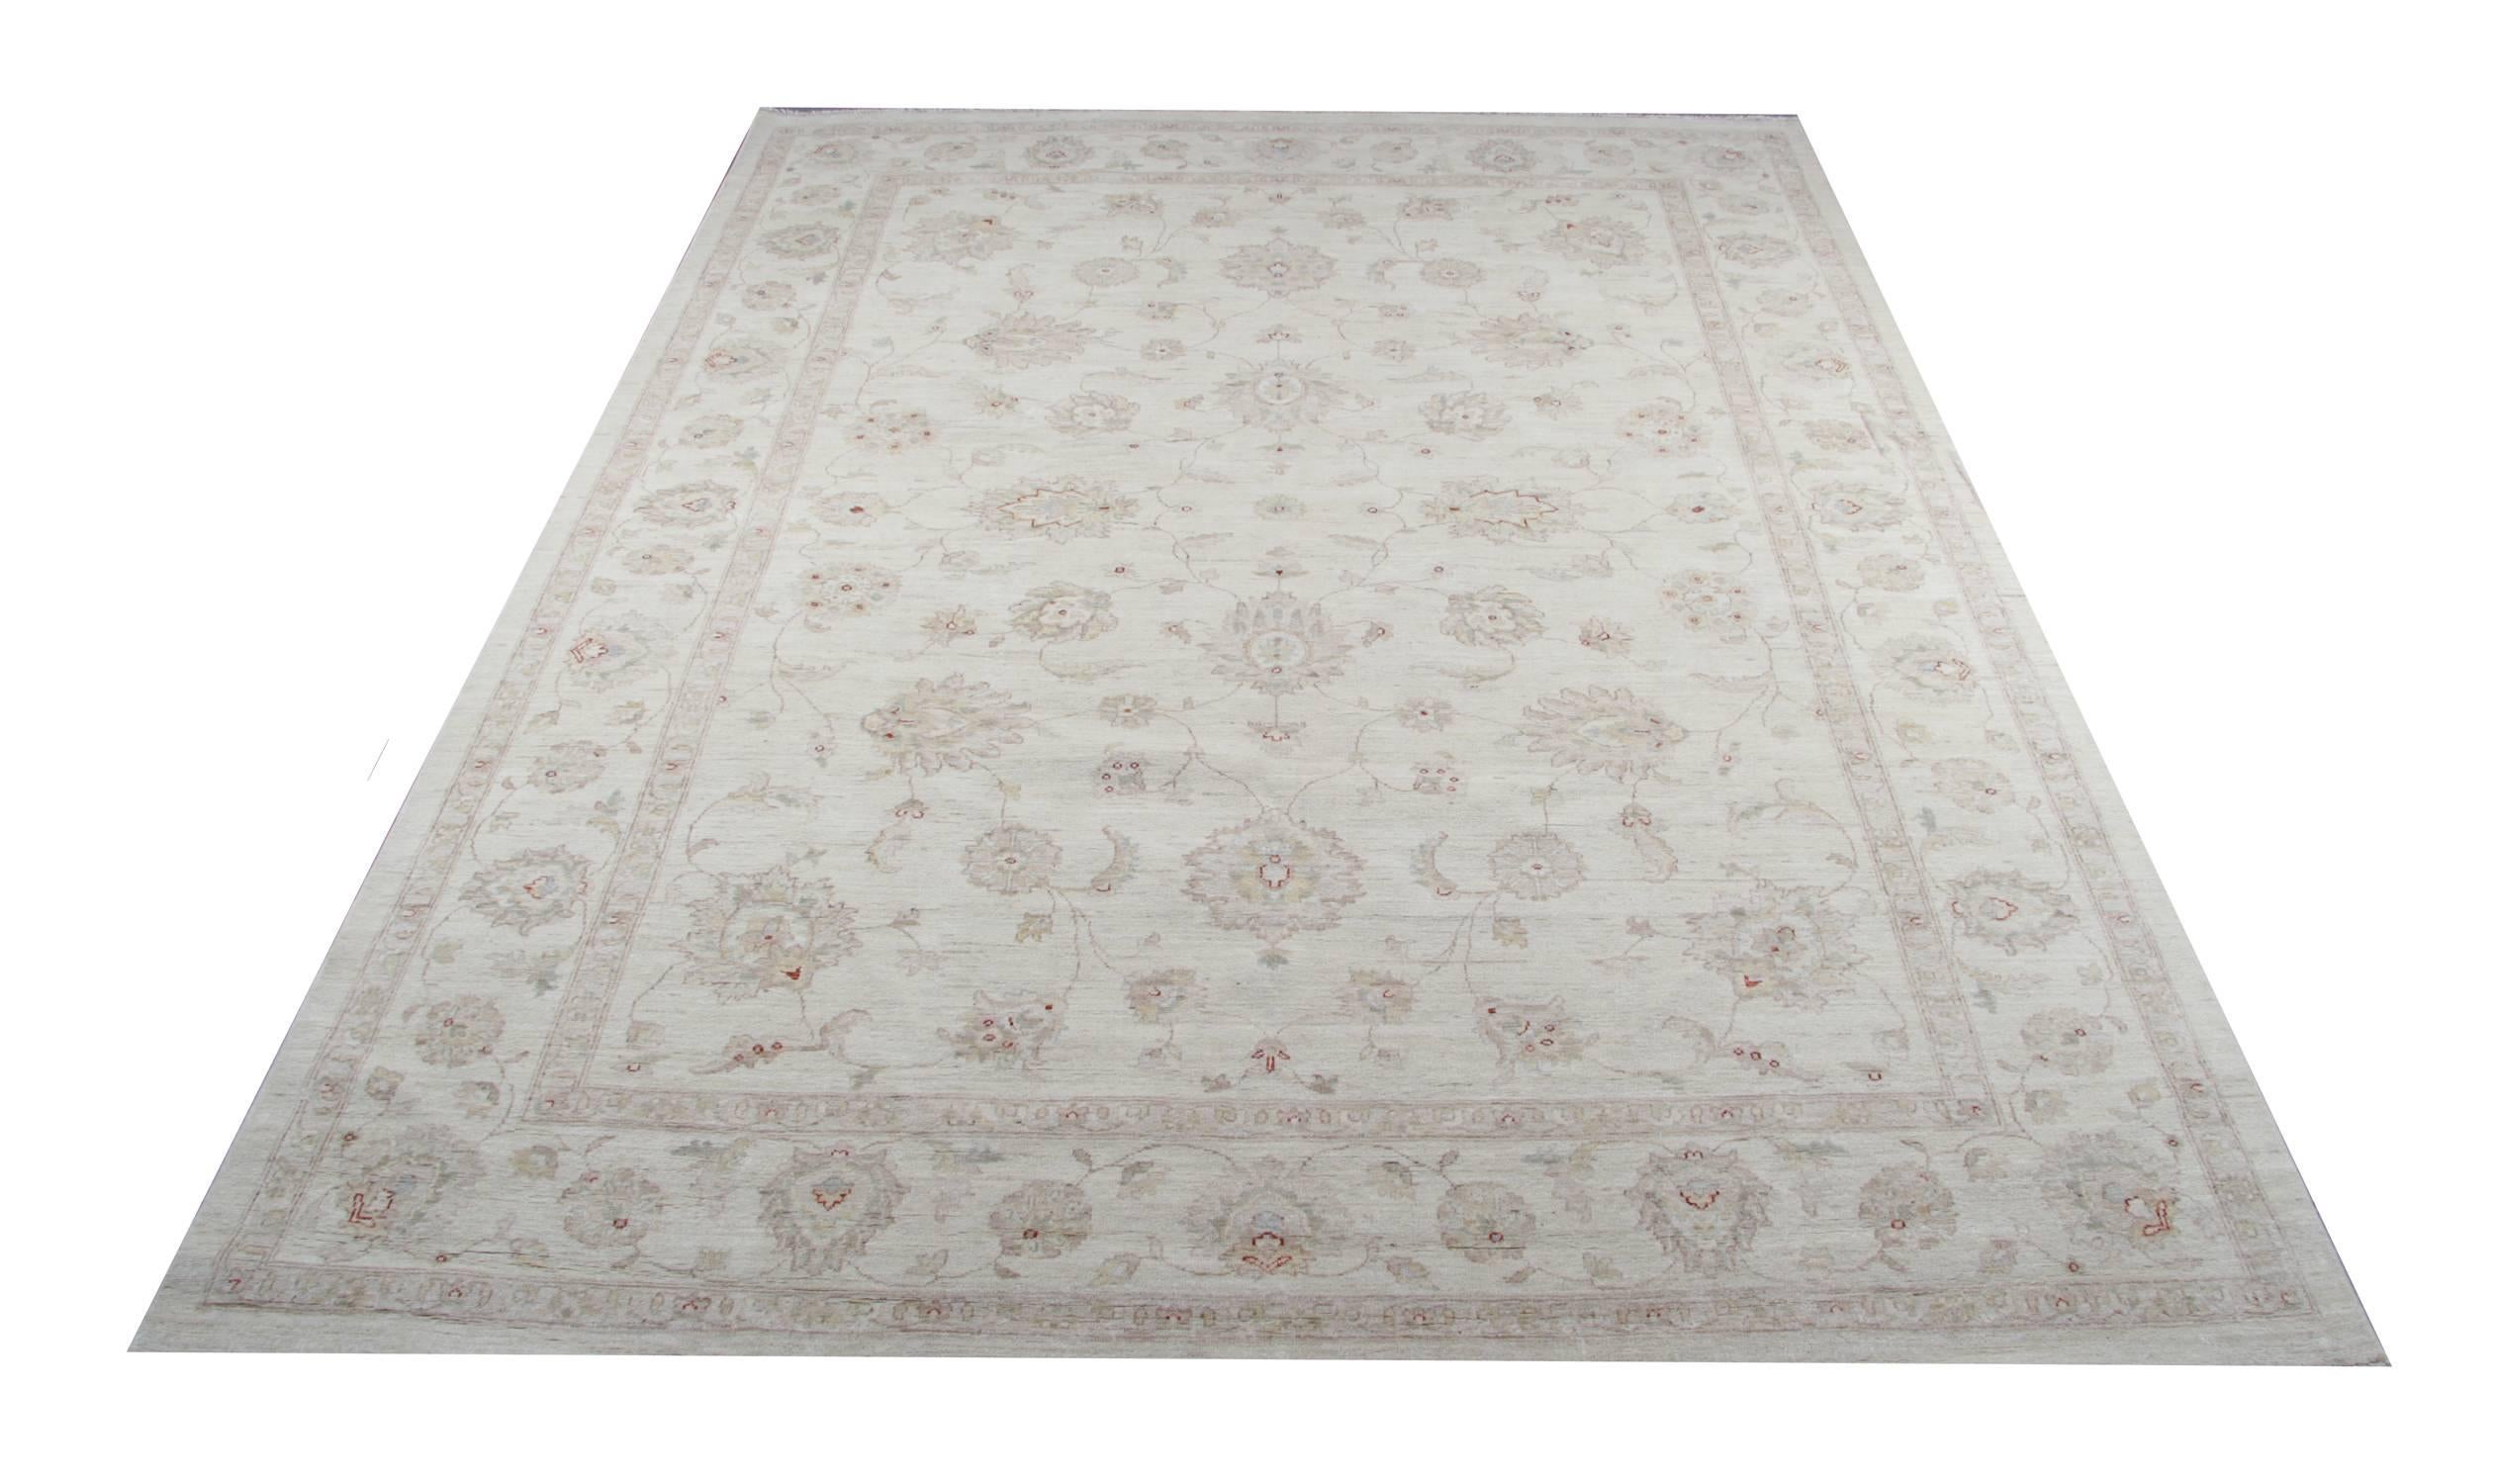 This is traditional rugs kind of our luxury rugs made of own looms by our master weavers of Afghan rugs, This cream rug is made with organic vegetable dyes all handspun wool rugs. This carpet rug is kind of patterned rugs all-over floral rugs design